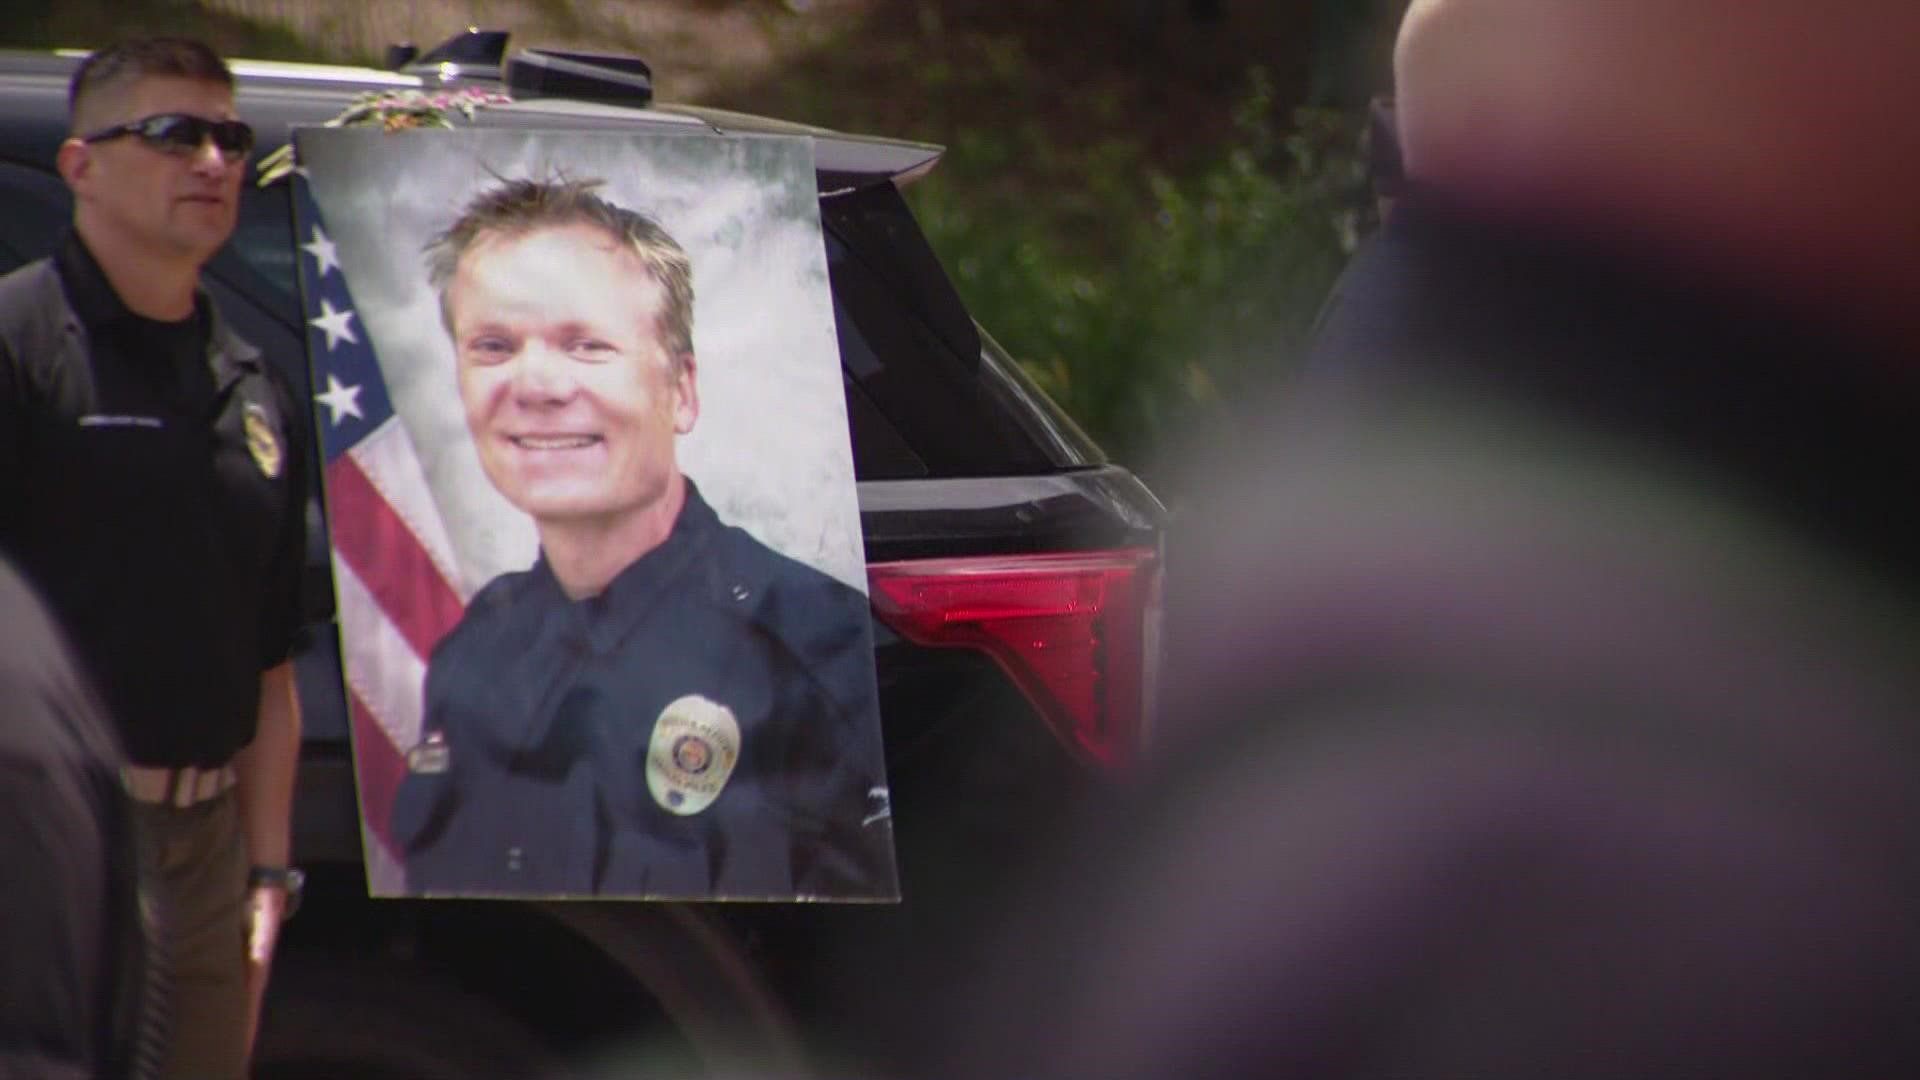 The Arvada community remembered police officer Gordon Beesley and good Samaritan Johnny Hurley who were killed by a gunman in Olde Town Arvada.